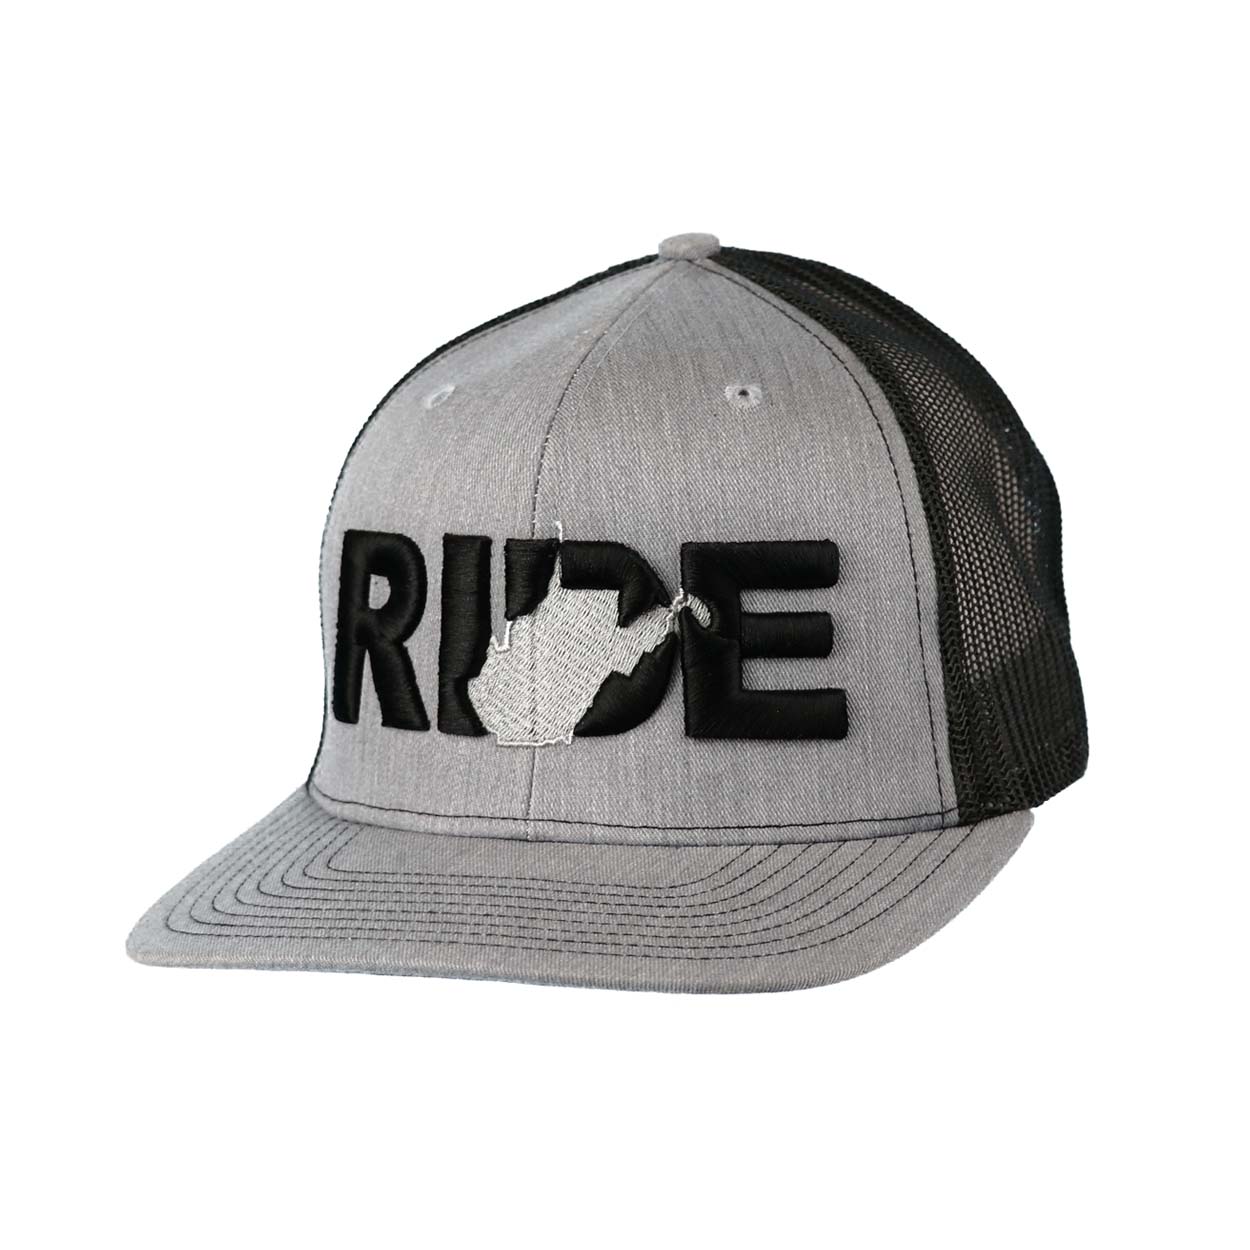 Ride West Virginia Classic Pro 3D Puff Embroidered Snapback Trucker Hat Heather Gray/Black